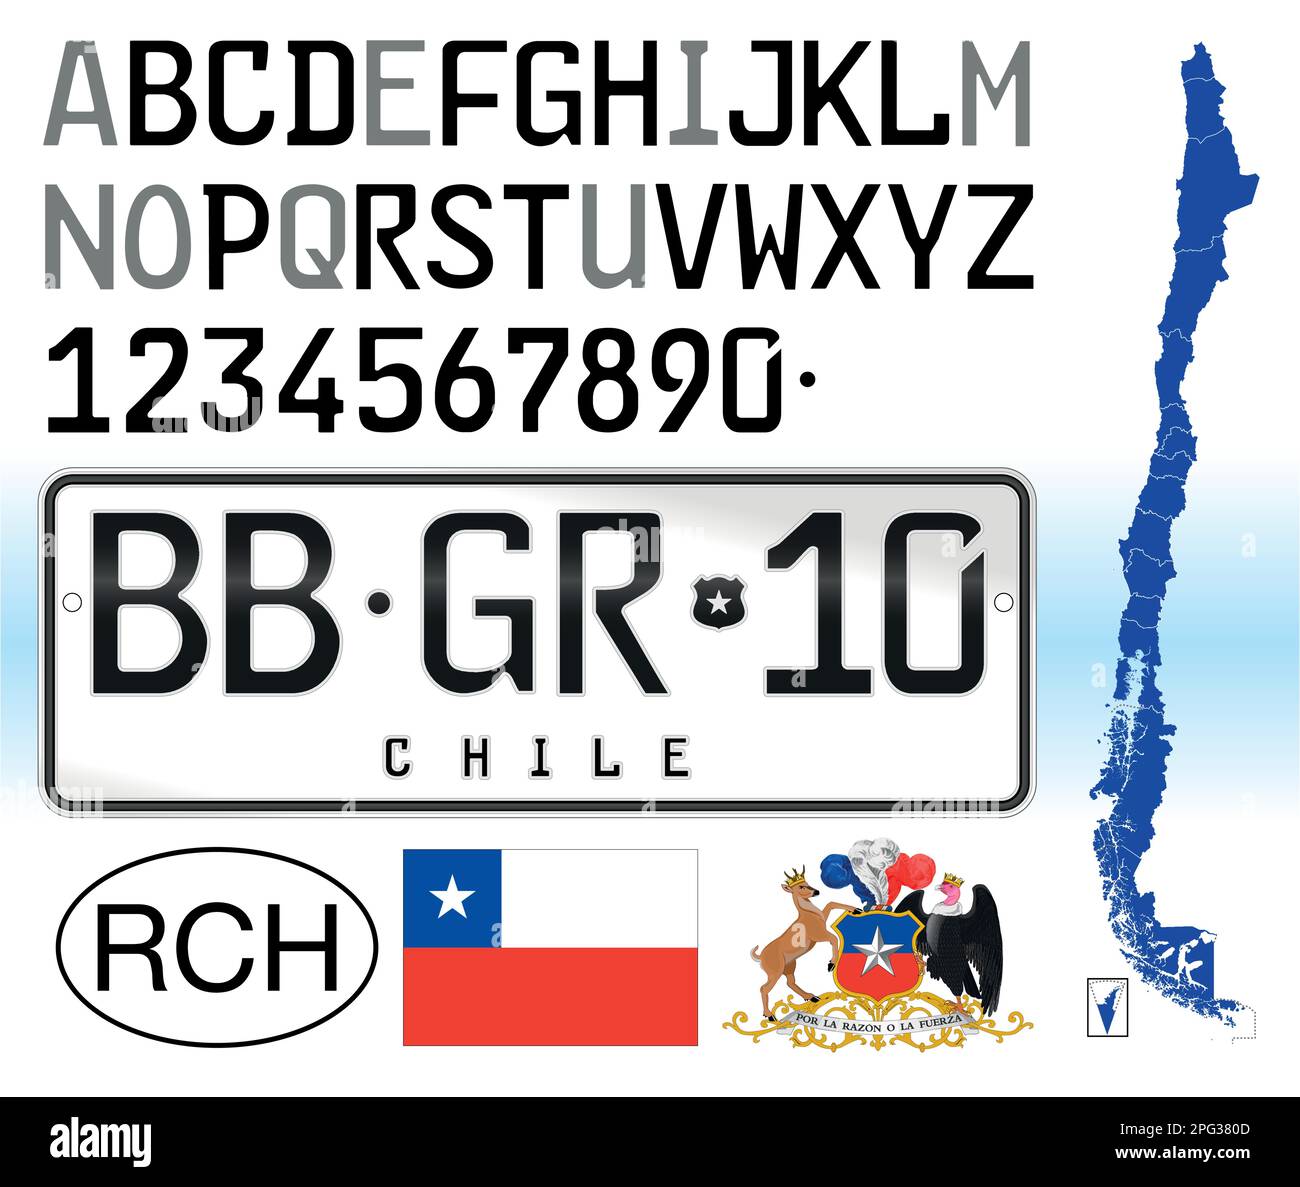 Chile car license plate new style, 2014, letters, numbers and symbols, vector illustration, Republic of Chile Stock Vector